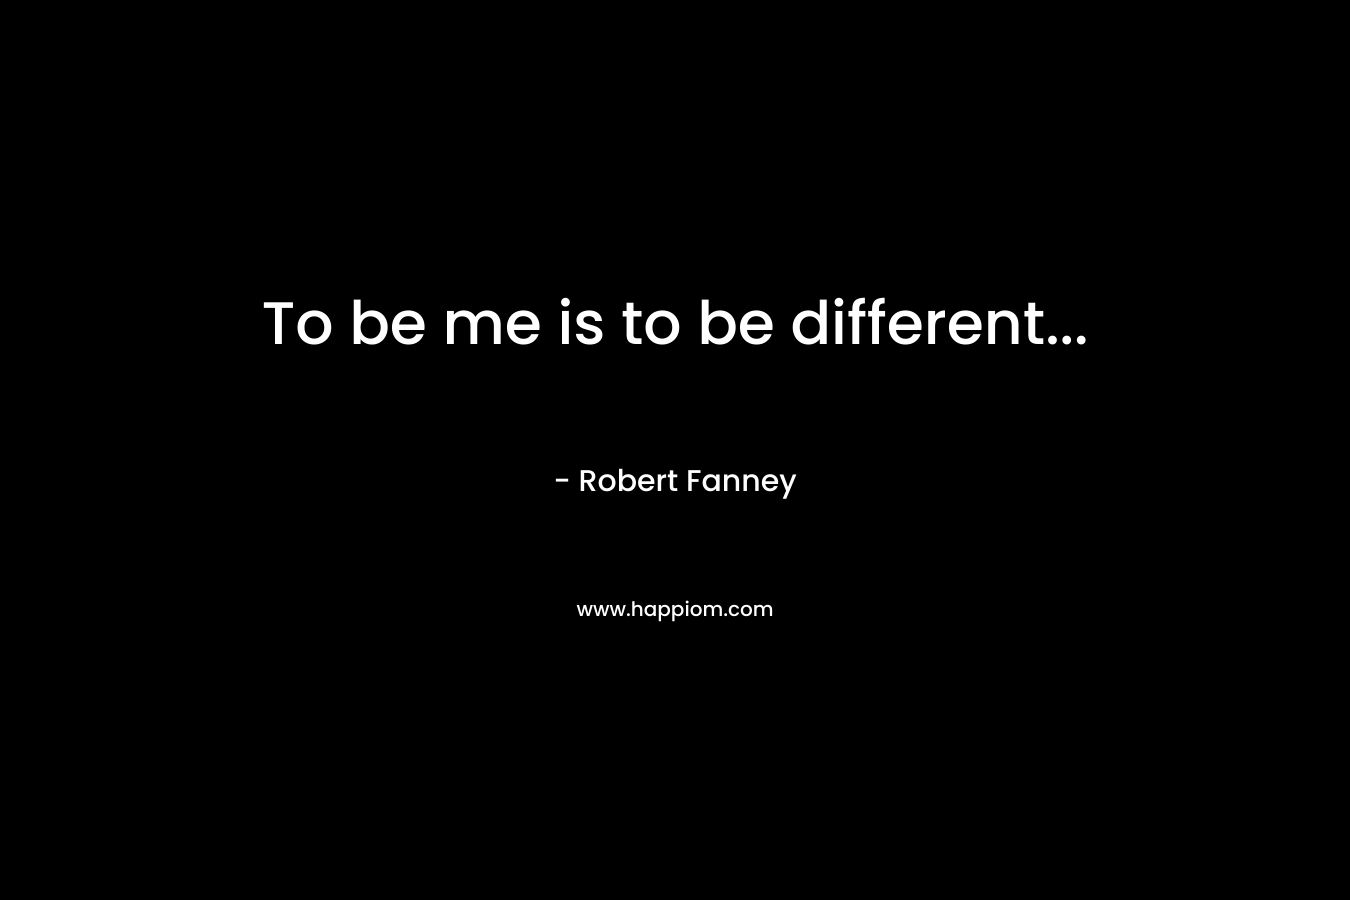 To be me is to be different… – Robert Fanney